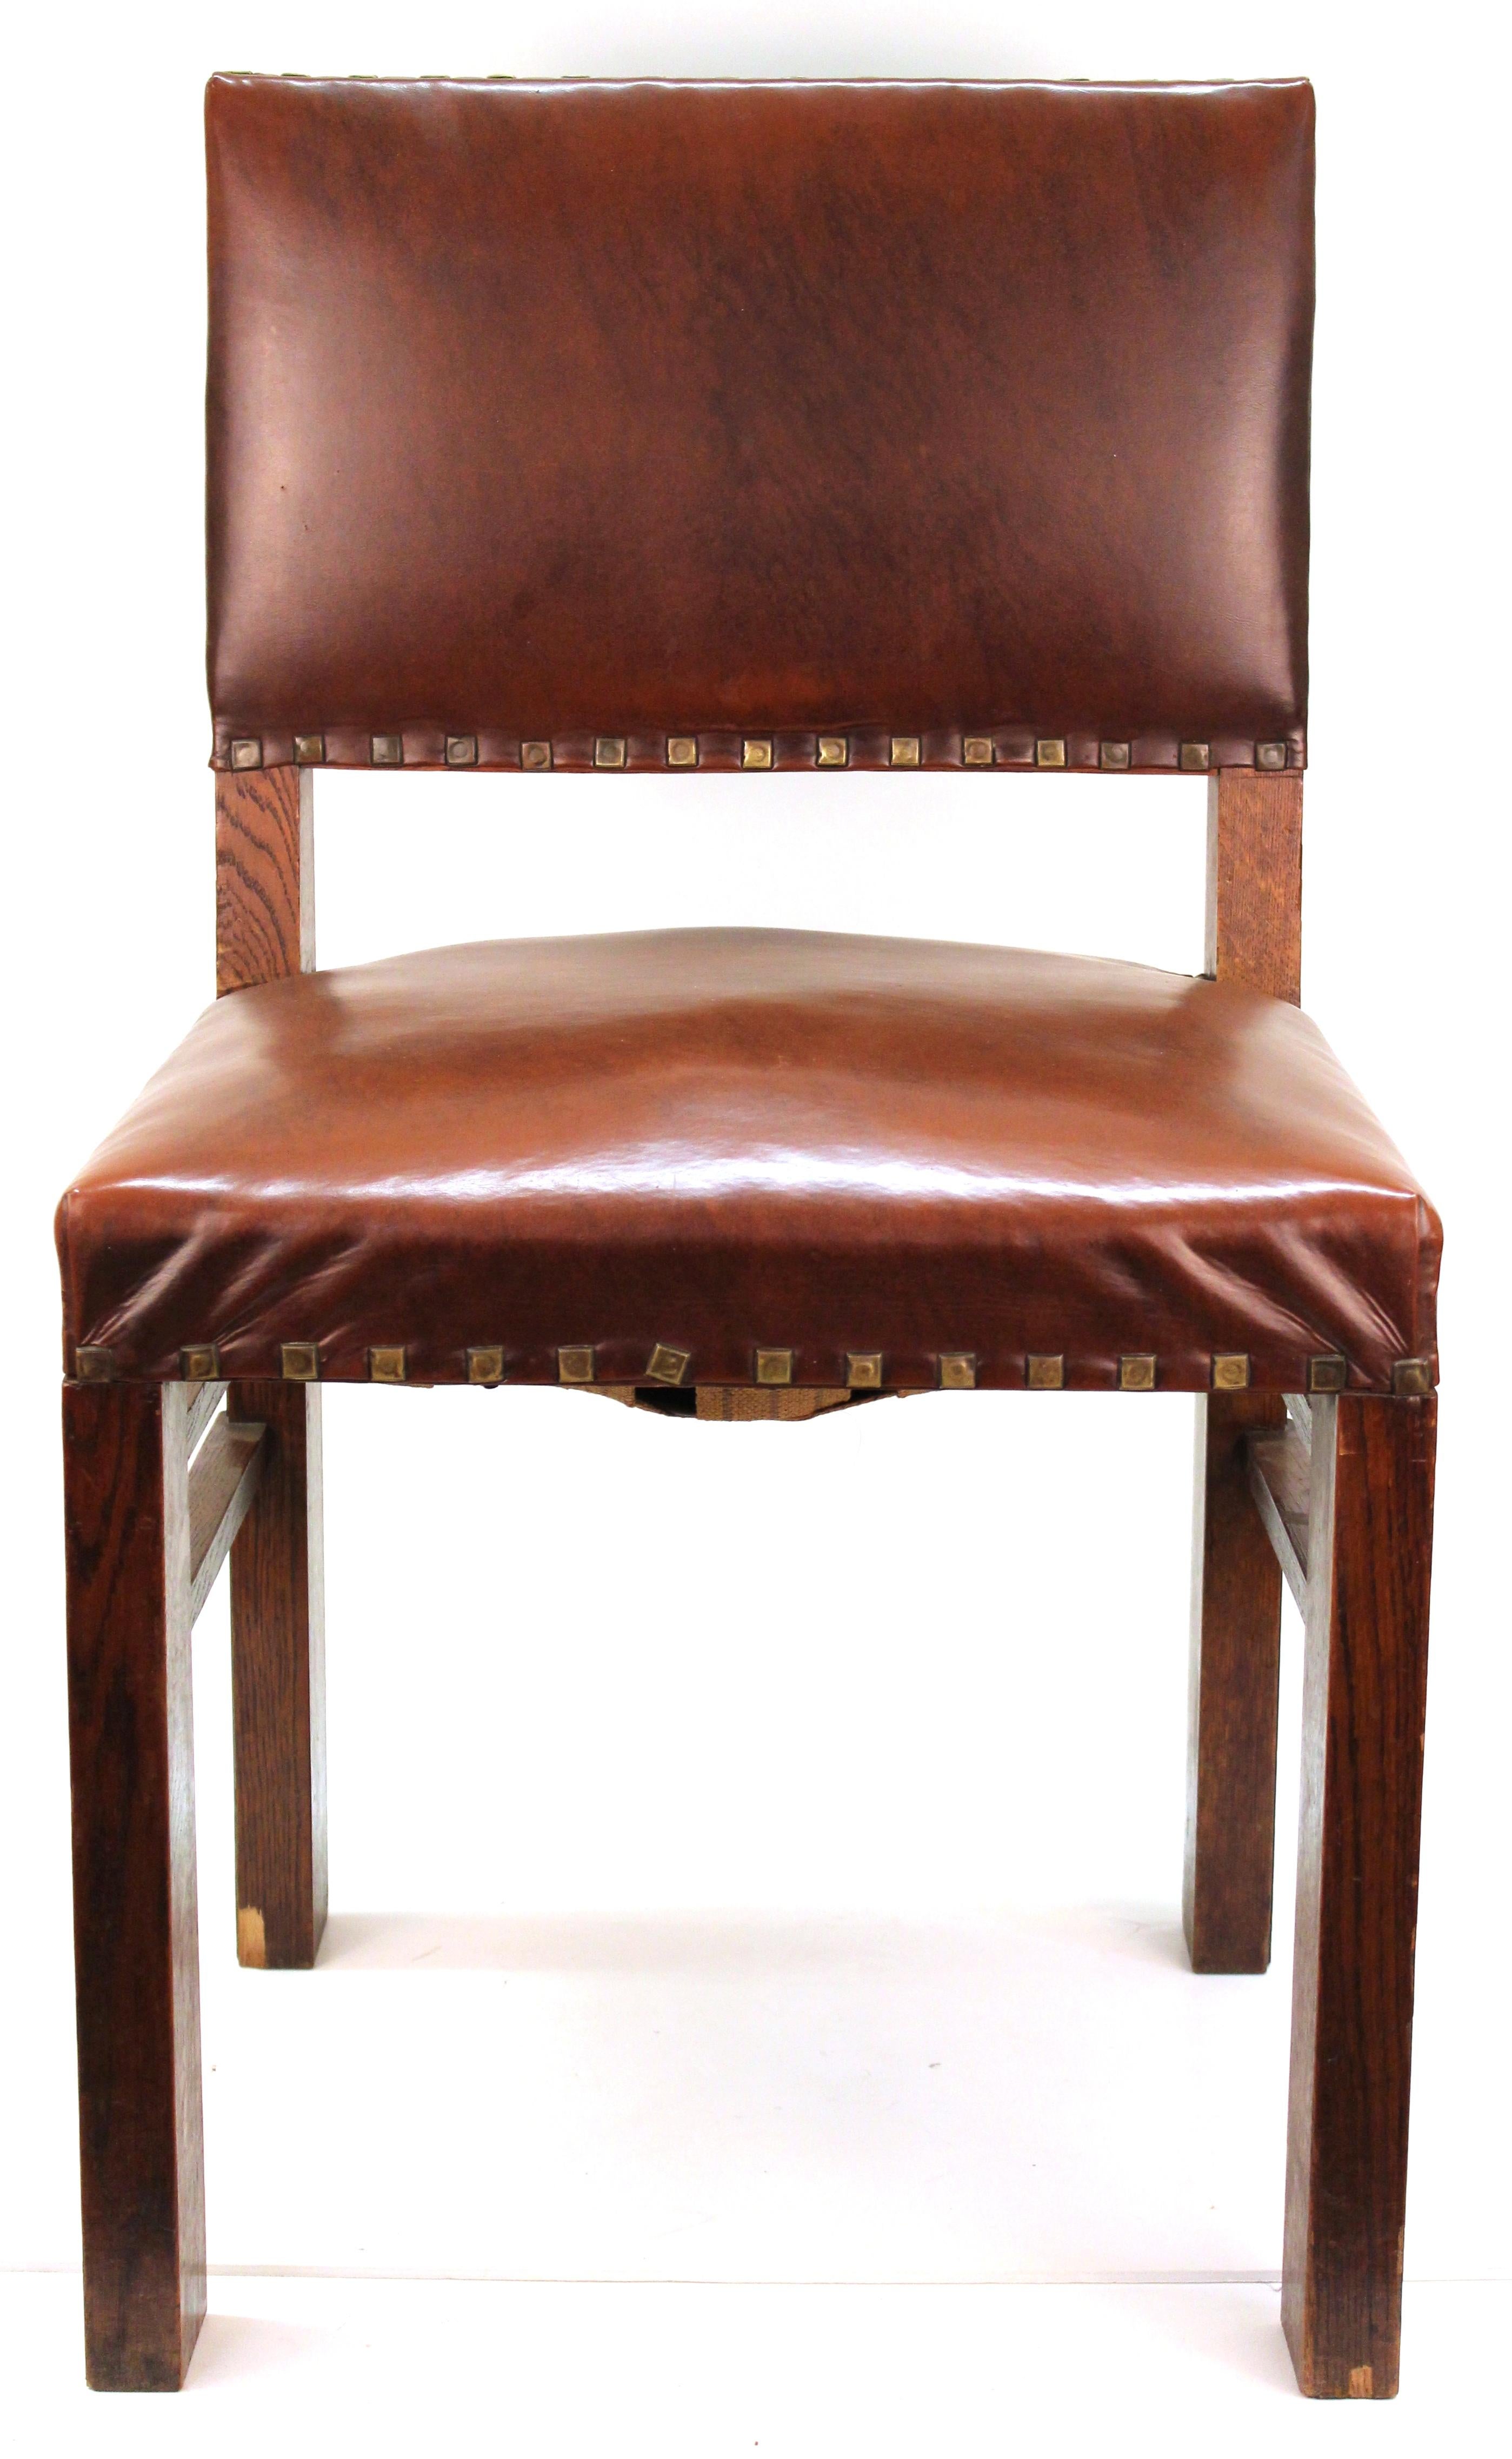 Early 20th Century American Chairs in Oak with Cognac Colored Leatherette Seats